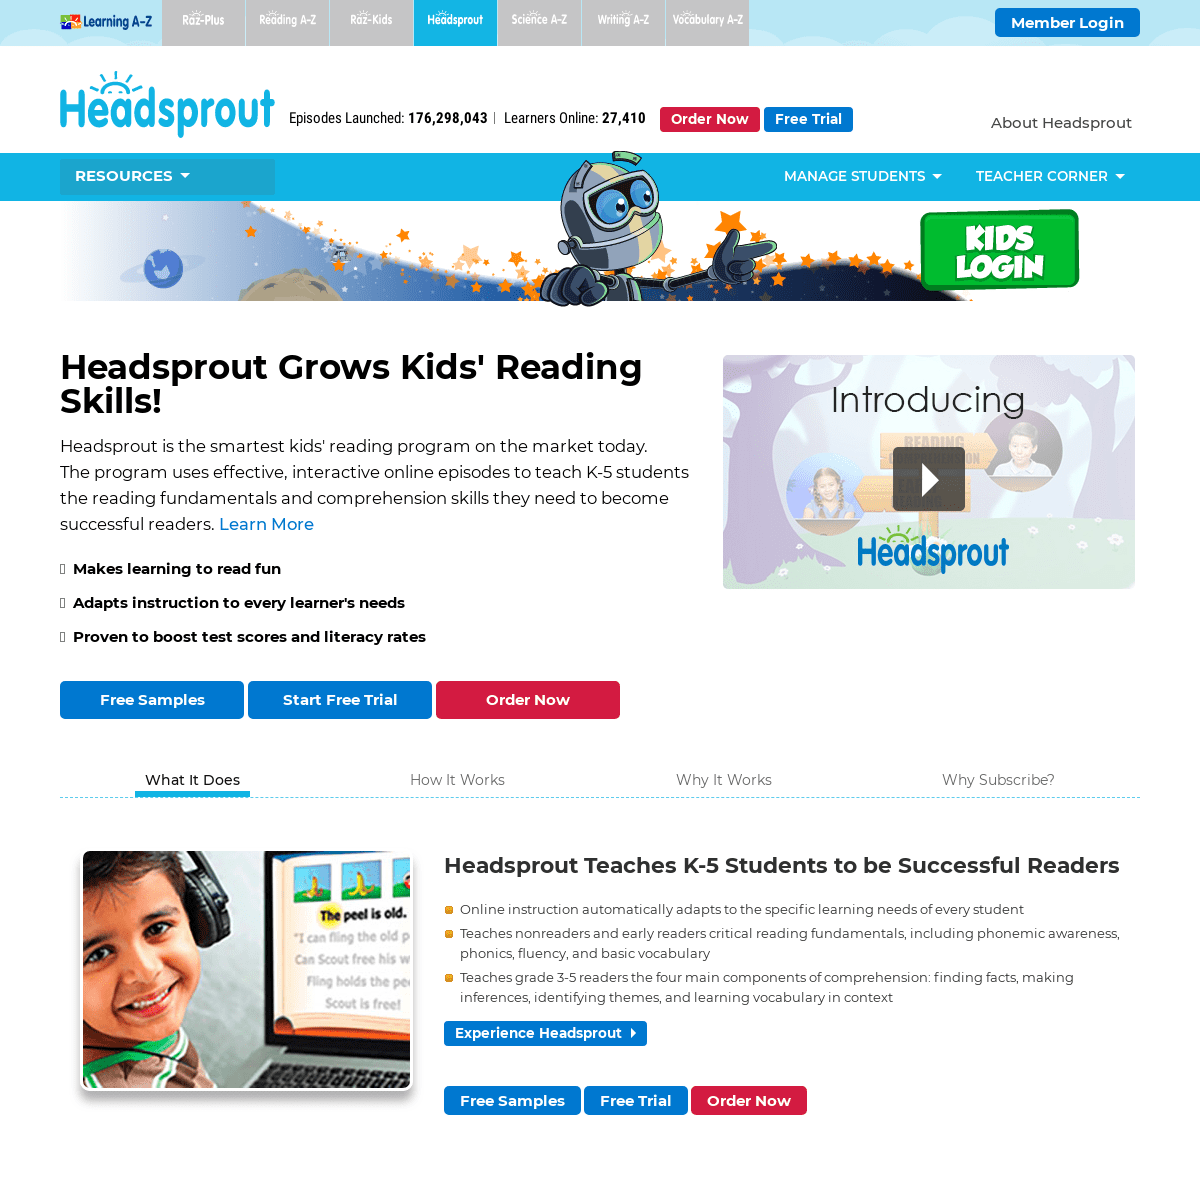 A complete backup of headsprout.com